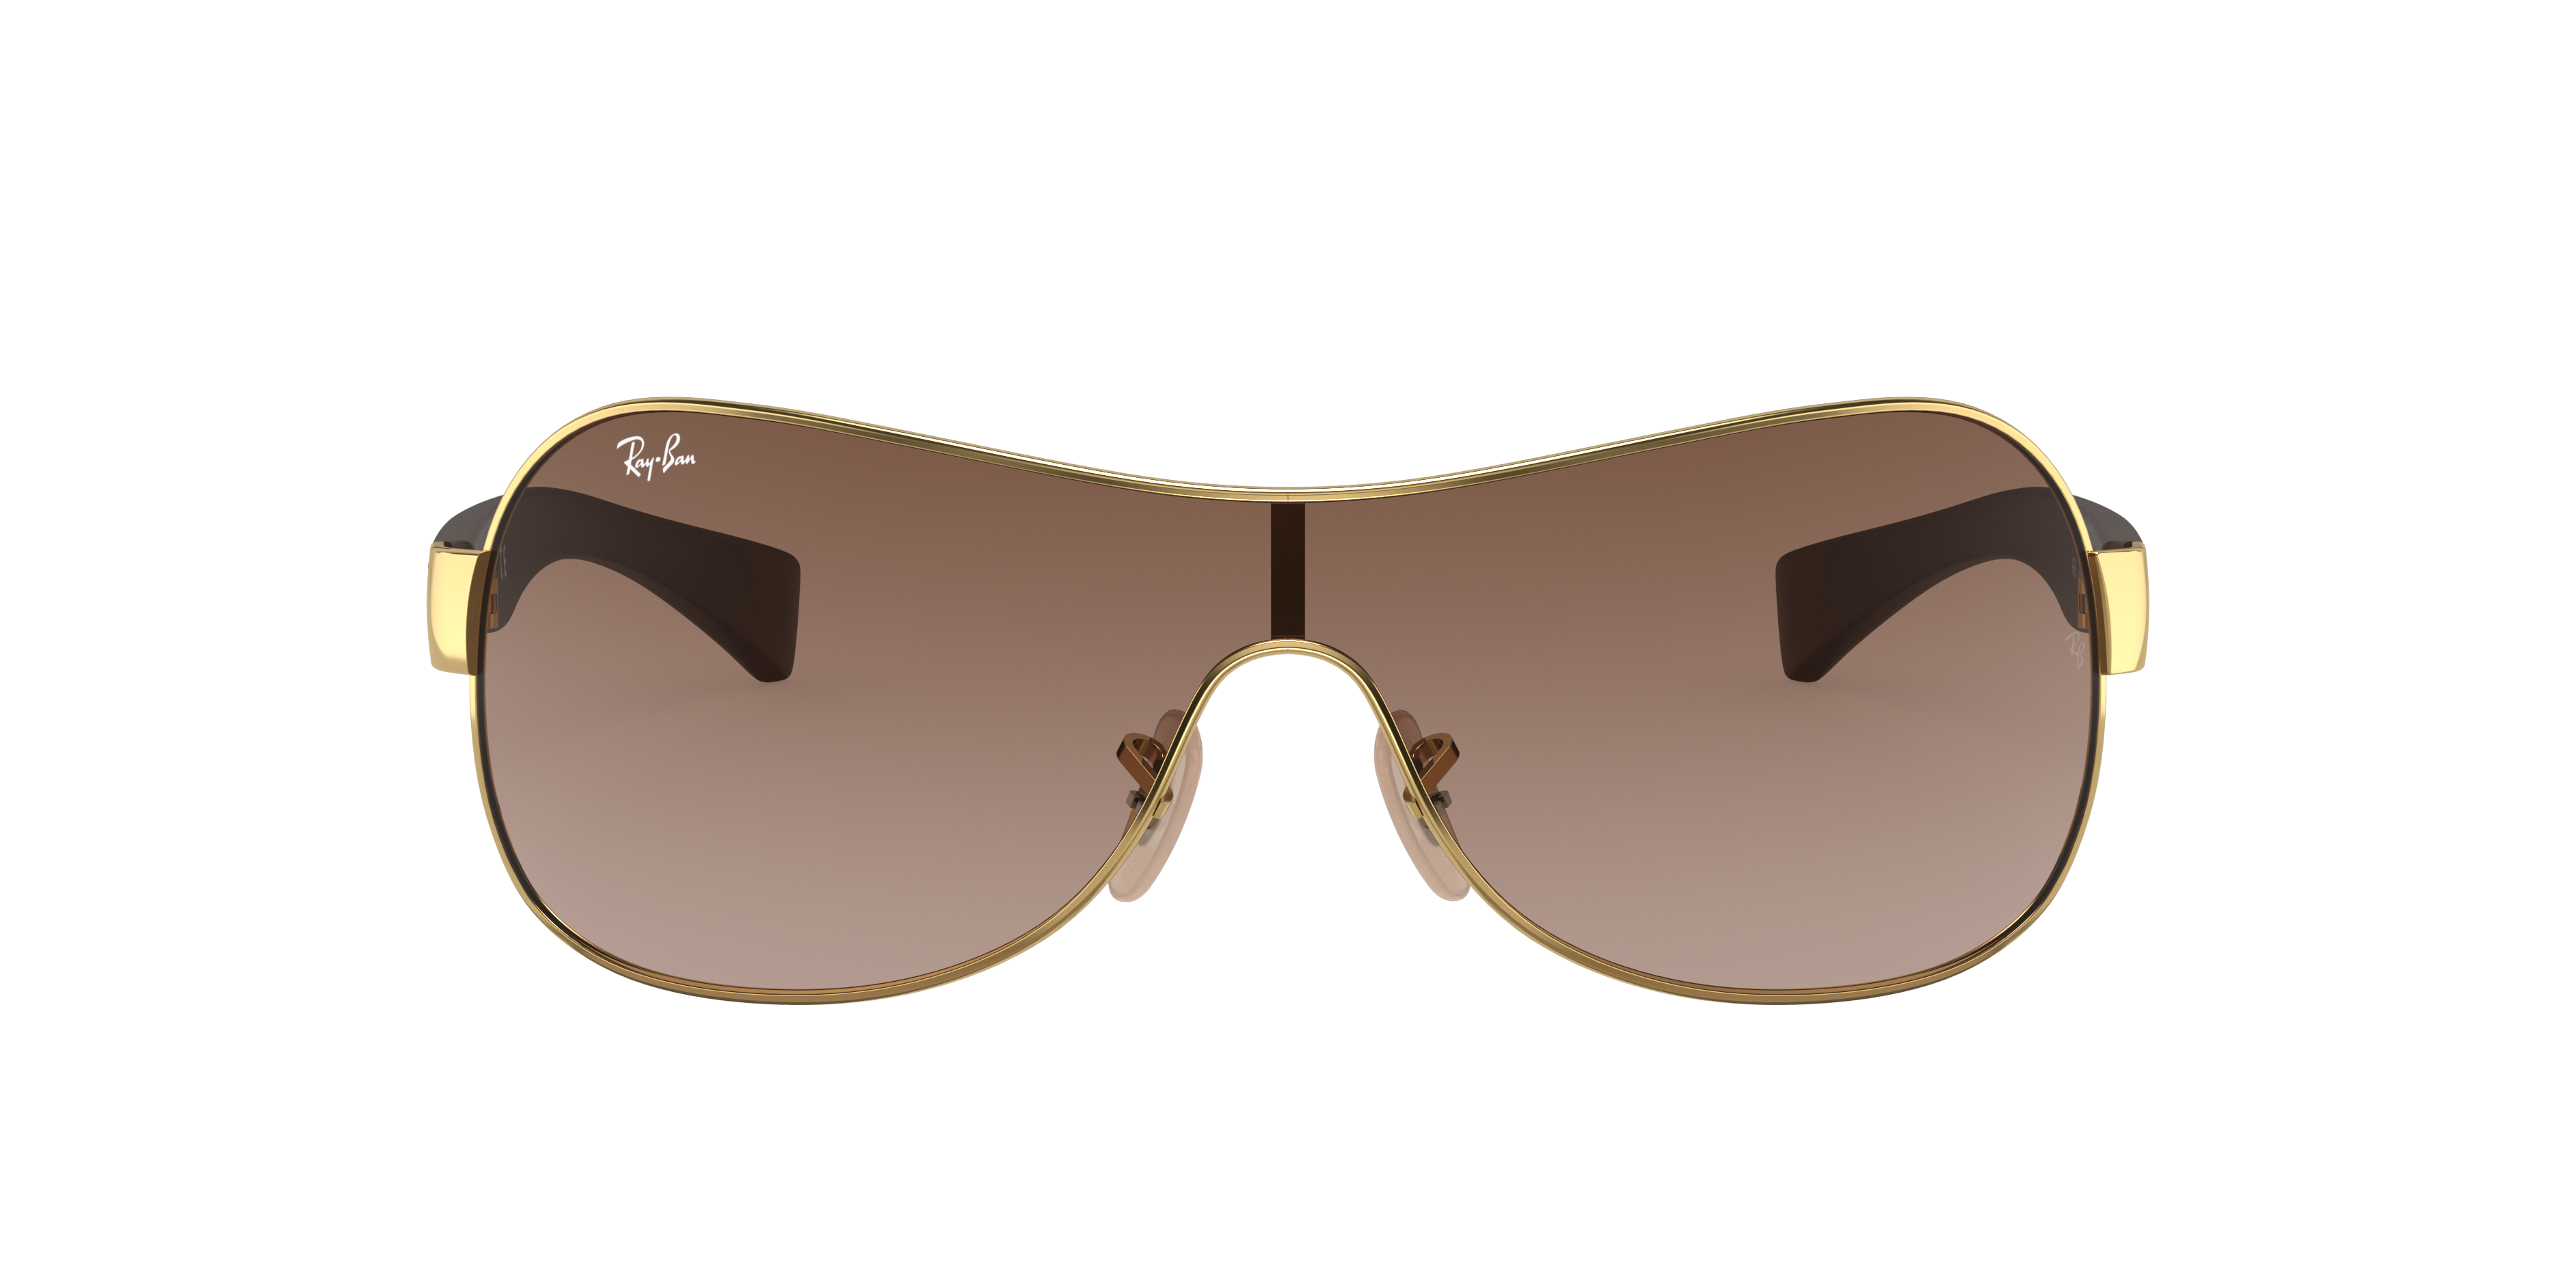 Ray-Ban RB3471 01 Brown Gradient \u0026 Gold 